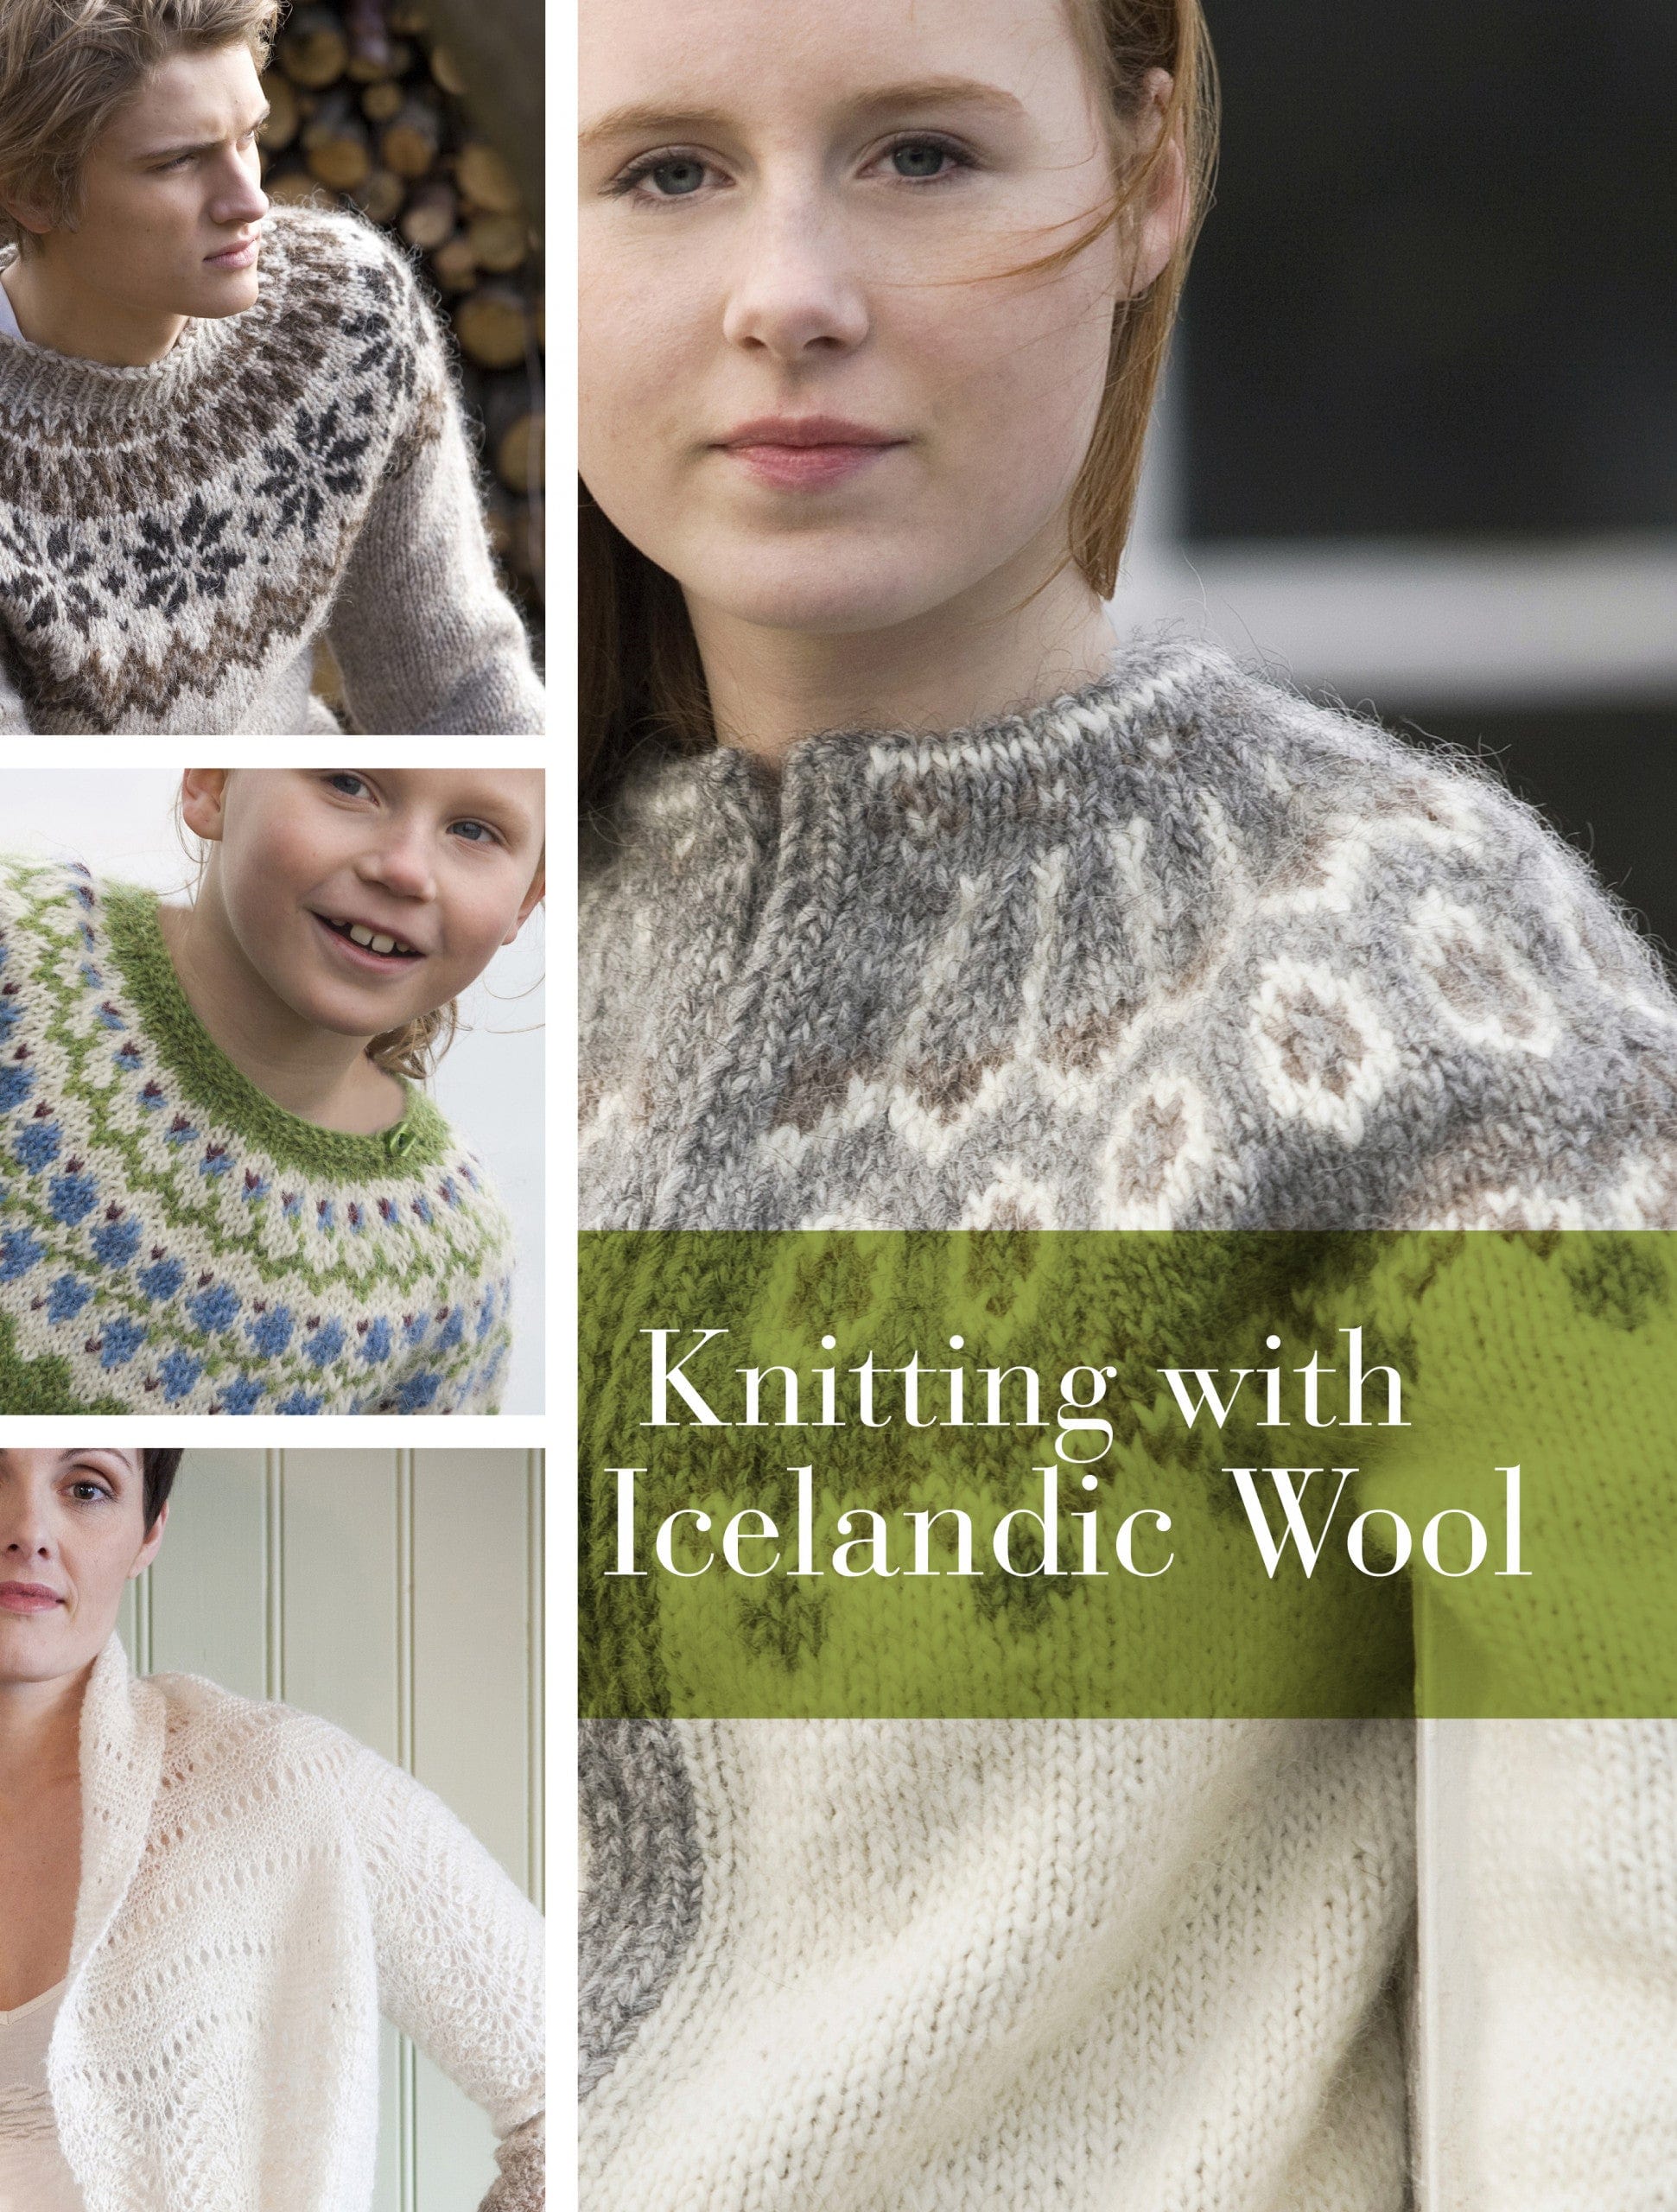 Knitting with Icelandic Wool - Knitting Book - The Icelandic Store